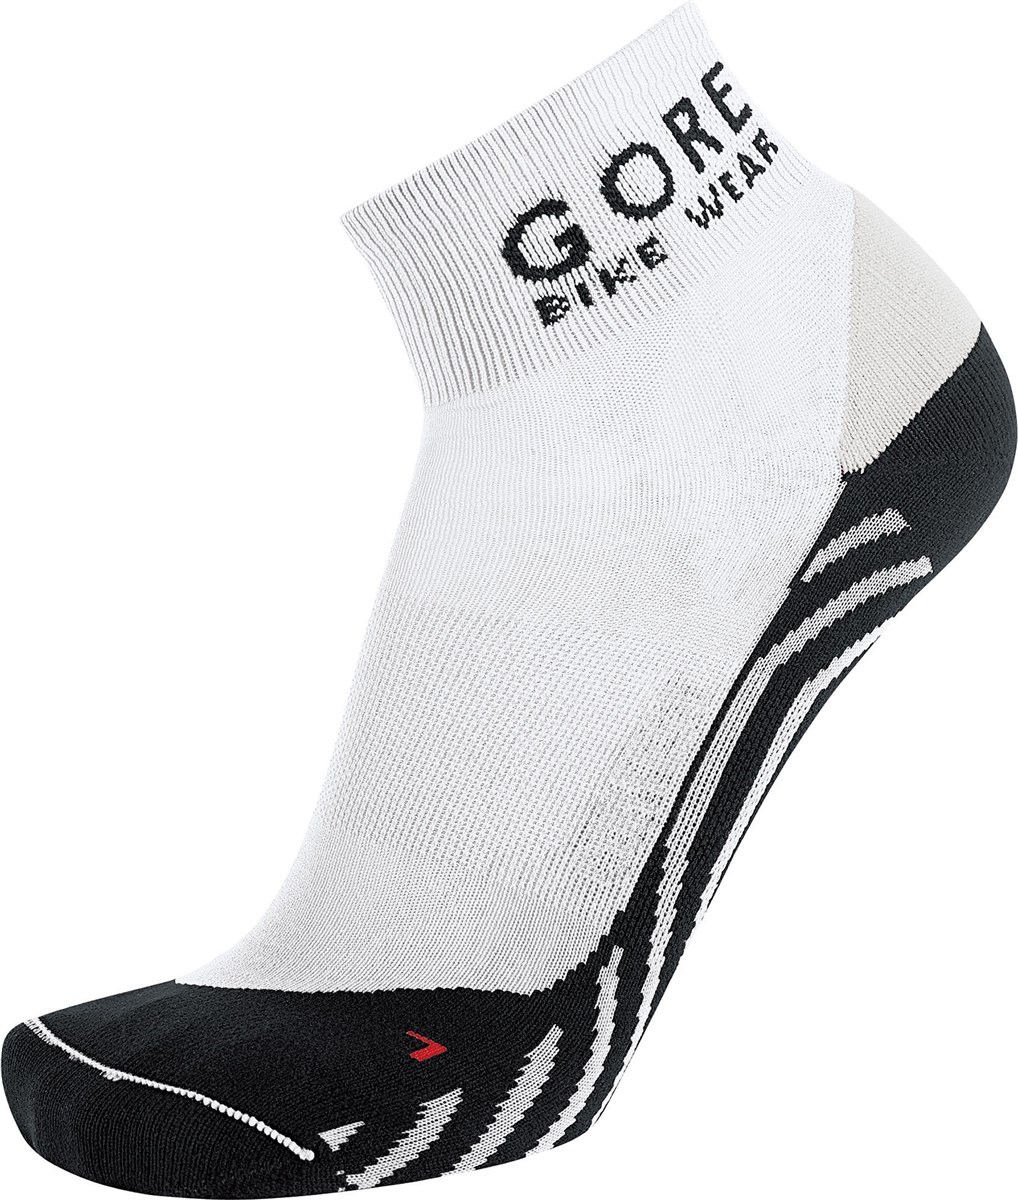 Gore Contest Socks AW17 product image